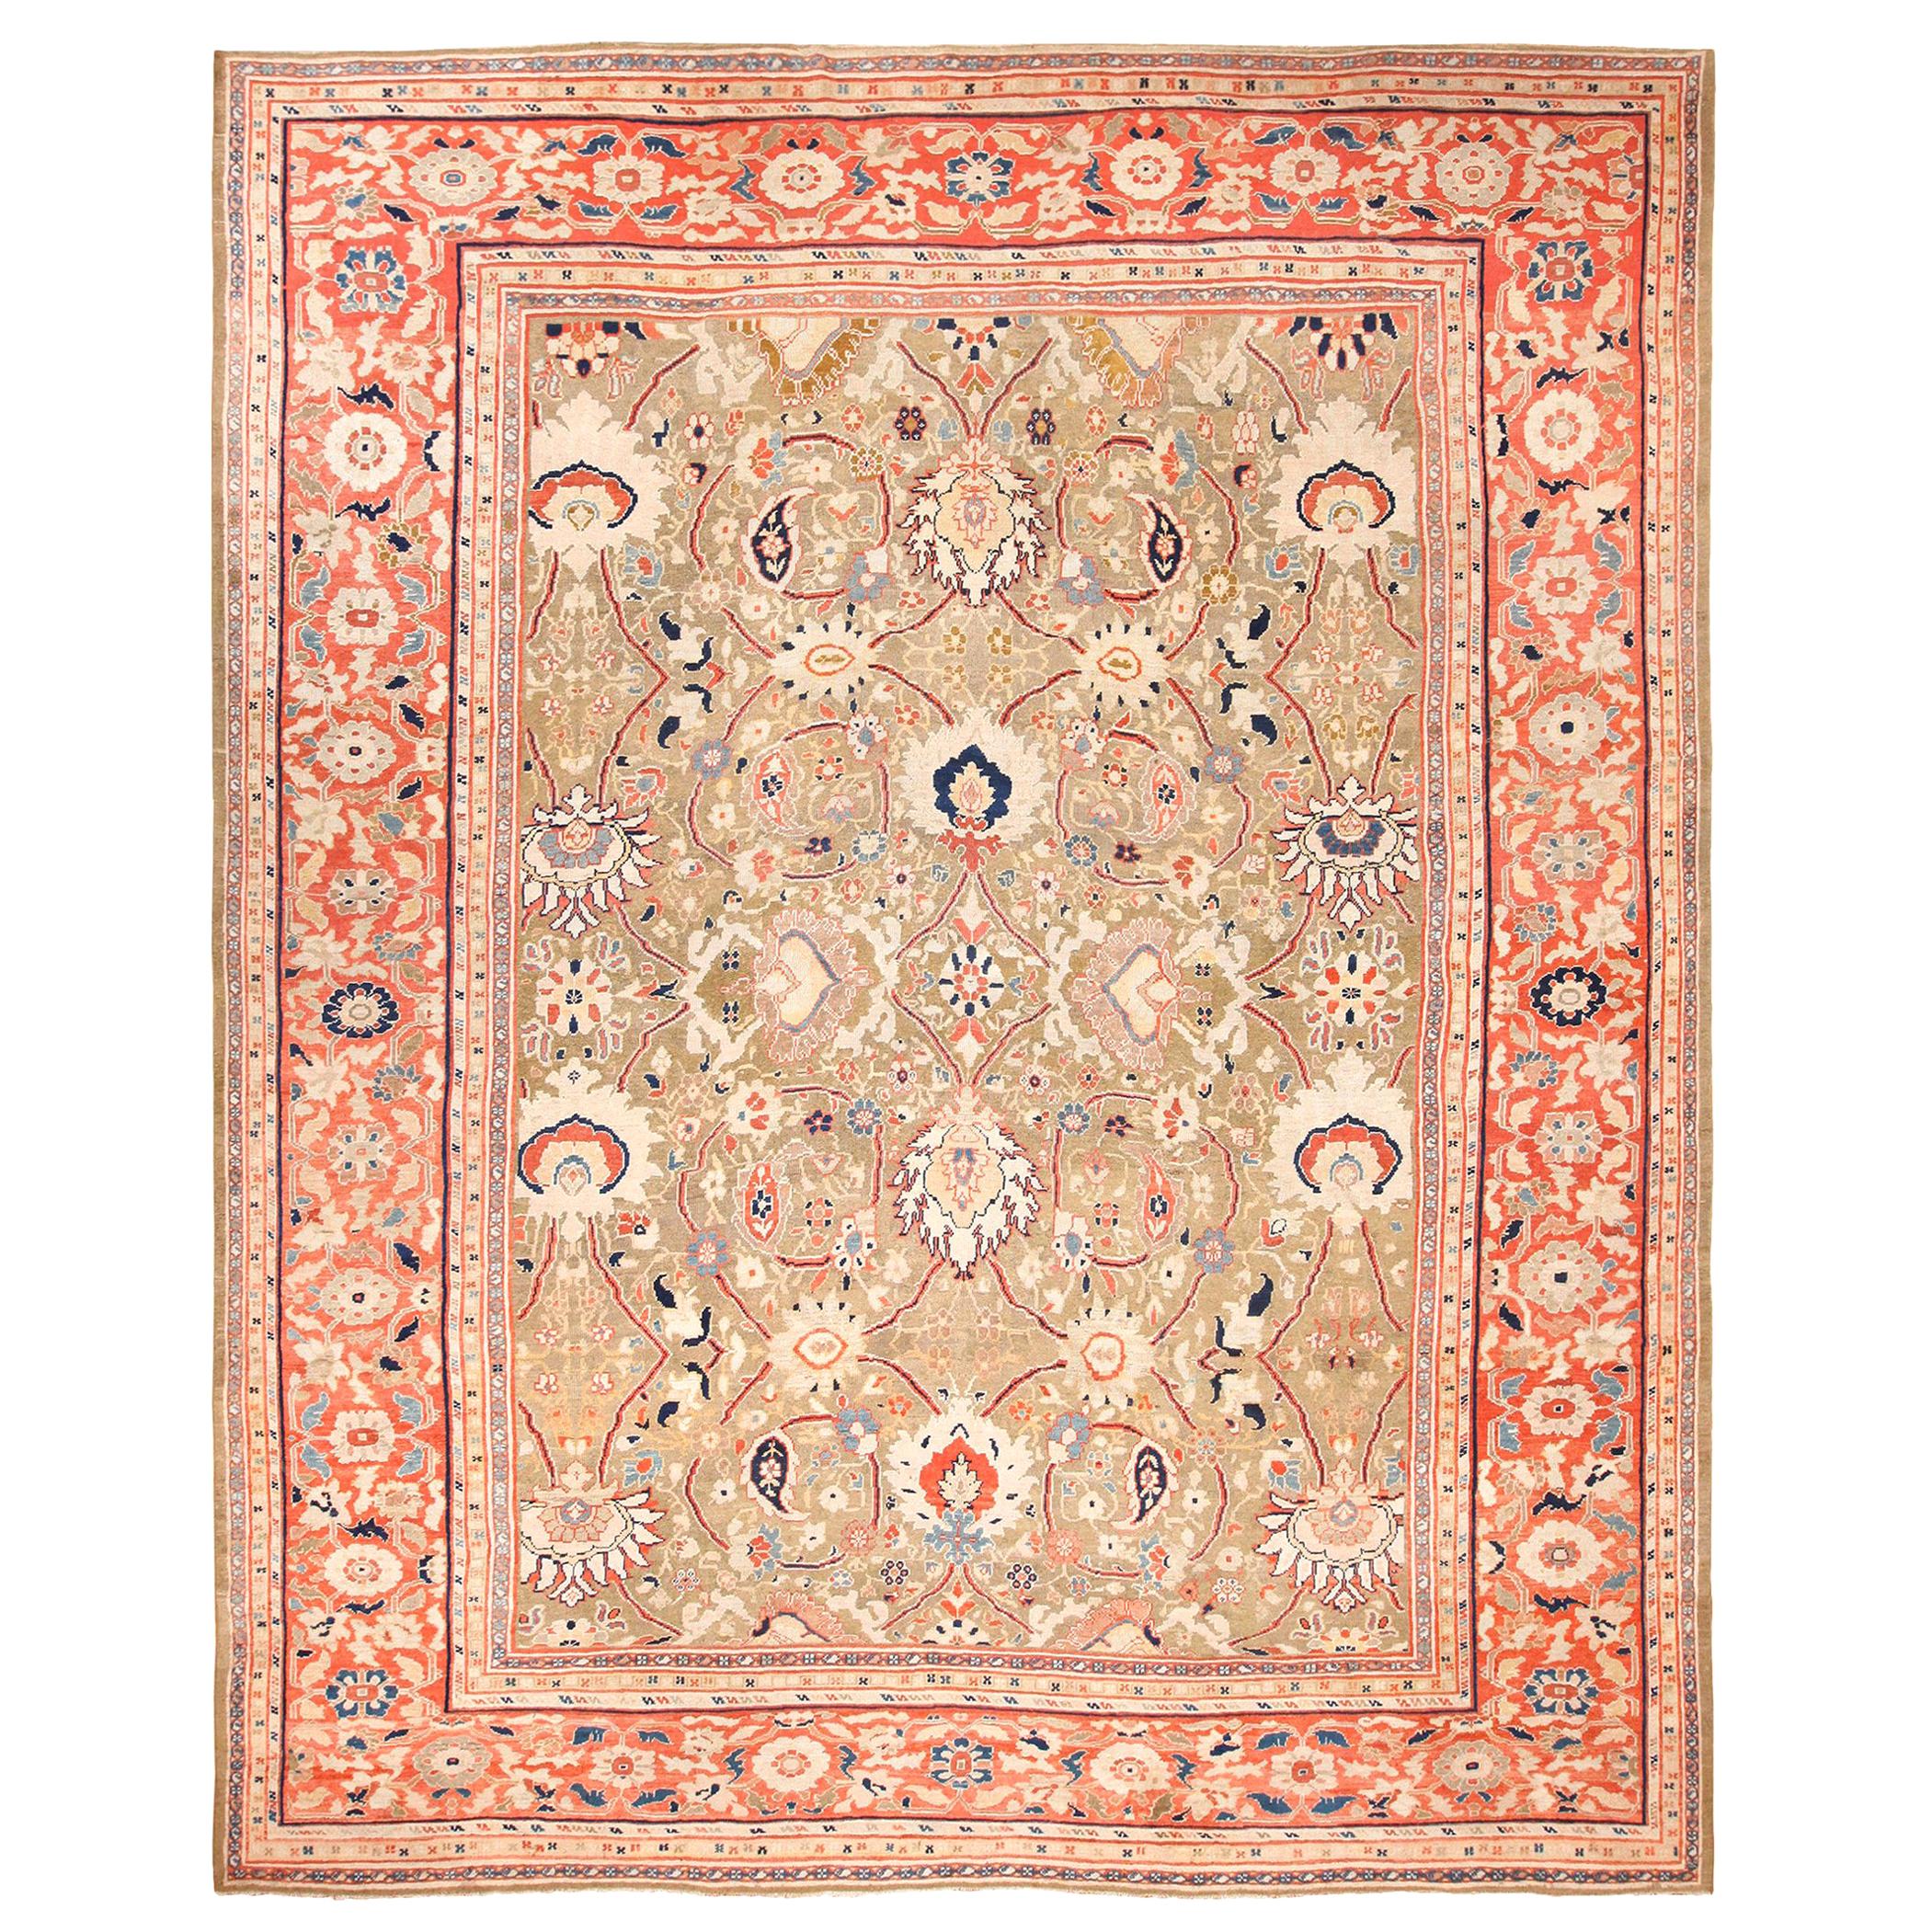 Tapis persan ancien Ziegler Sultanabad. Taille : 13 pieds 3 po. x 16 pieds 3 po. 